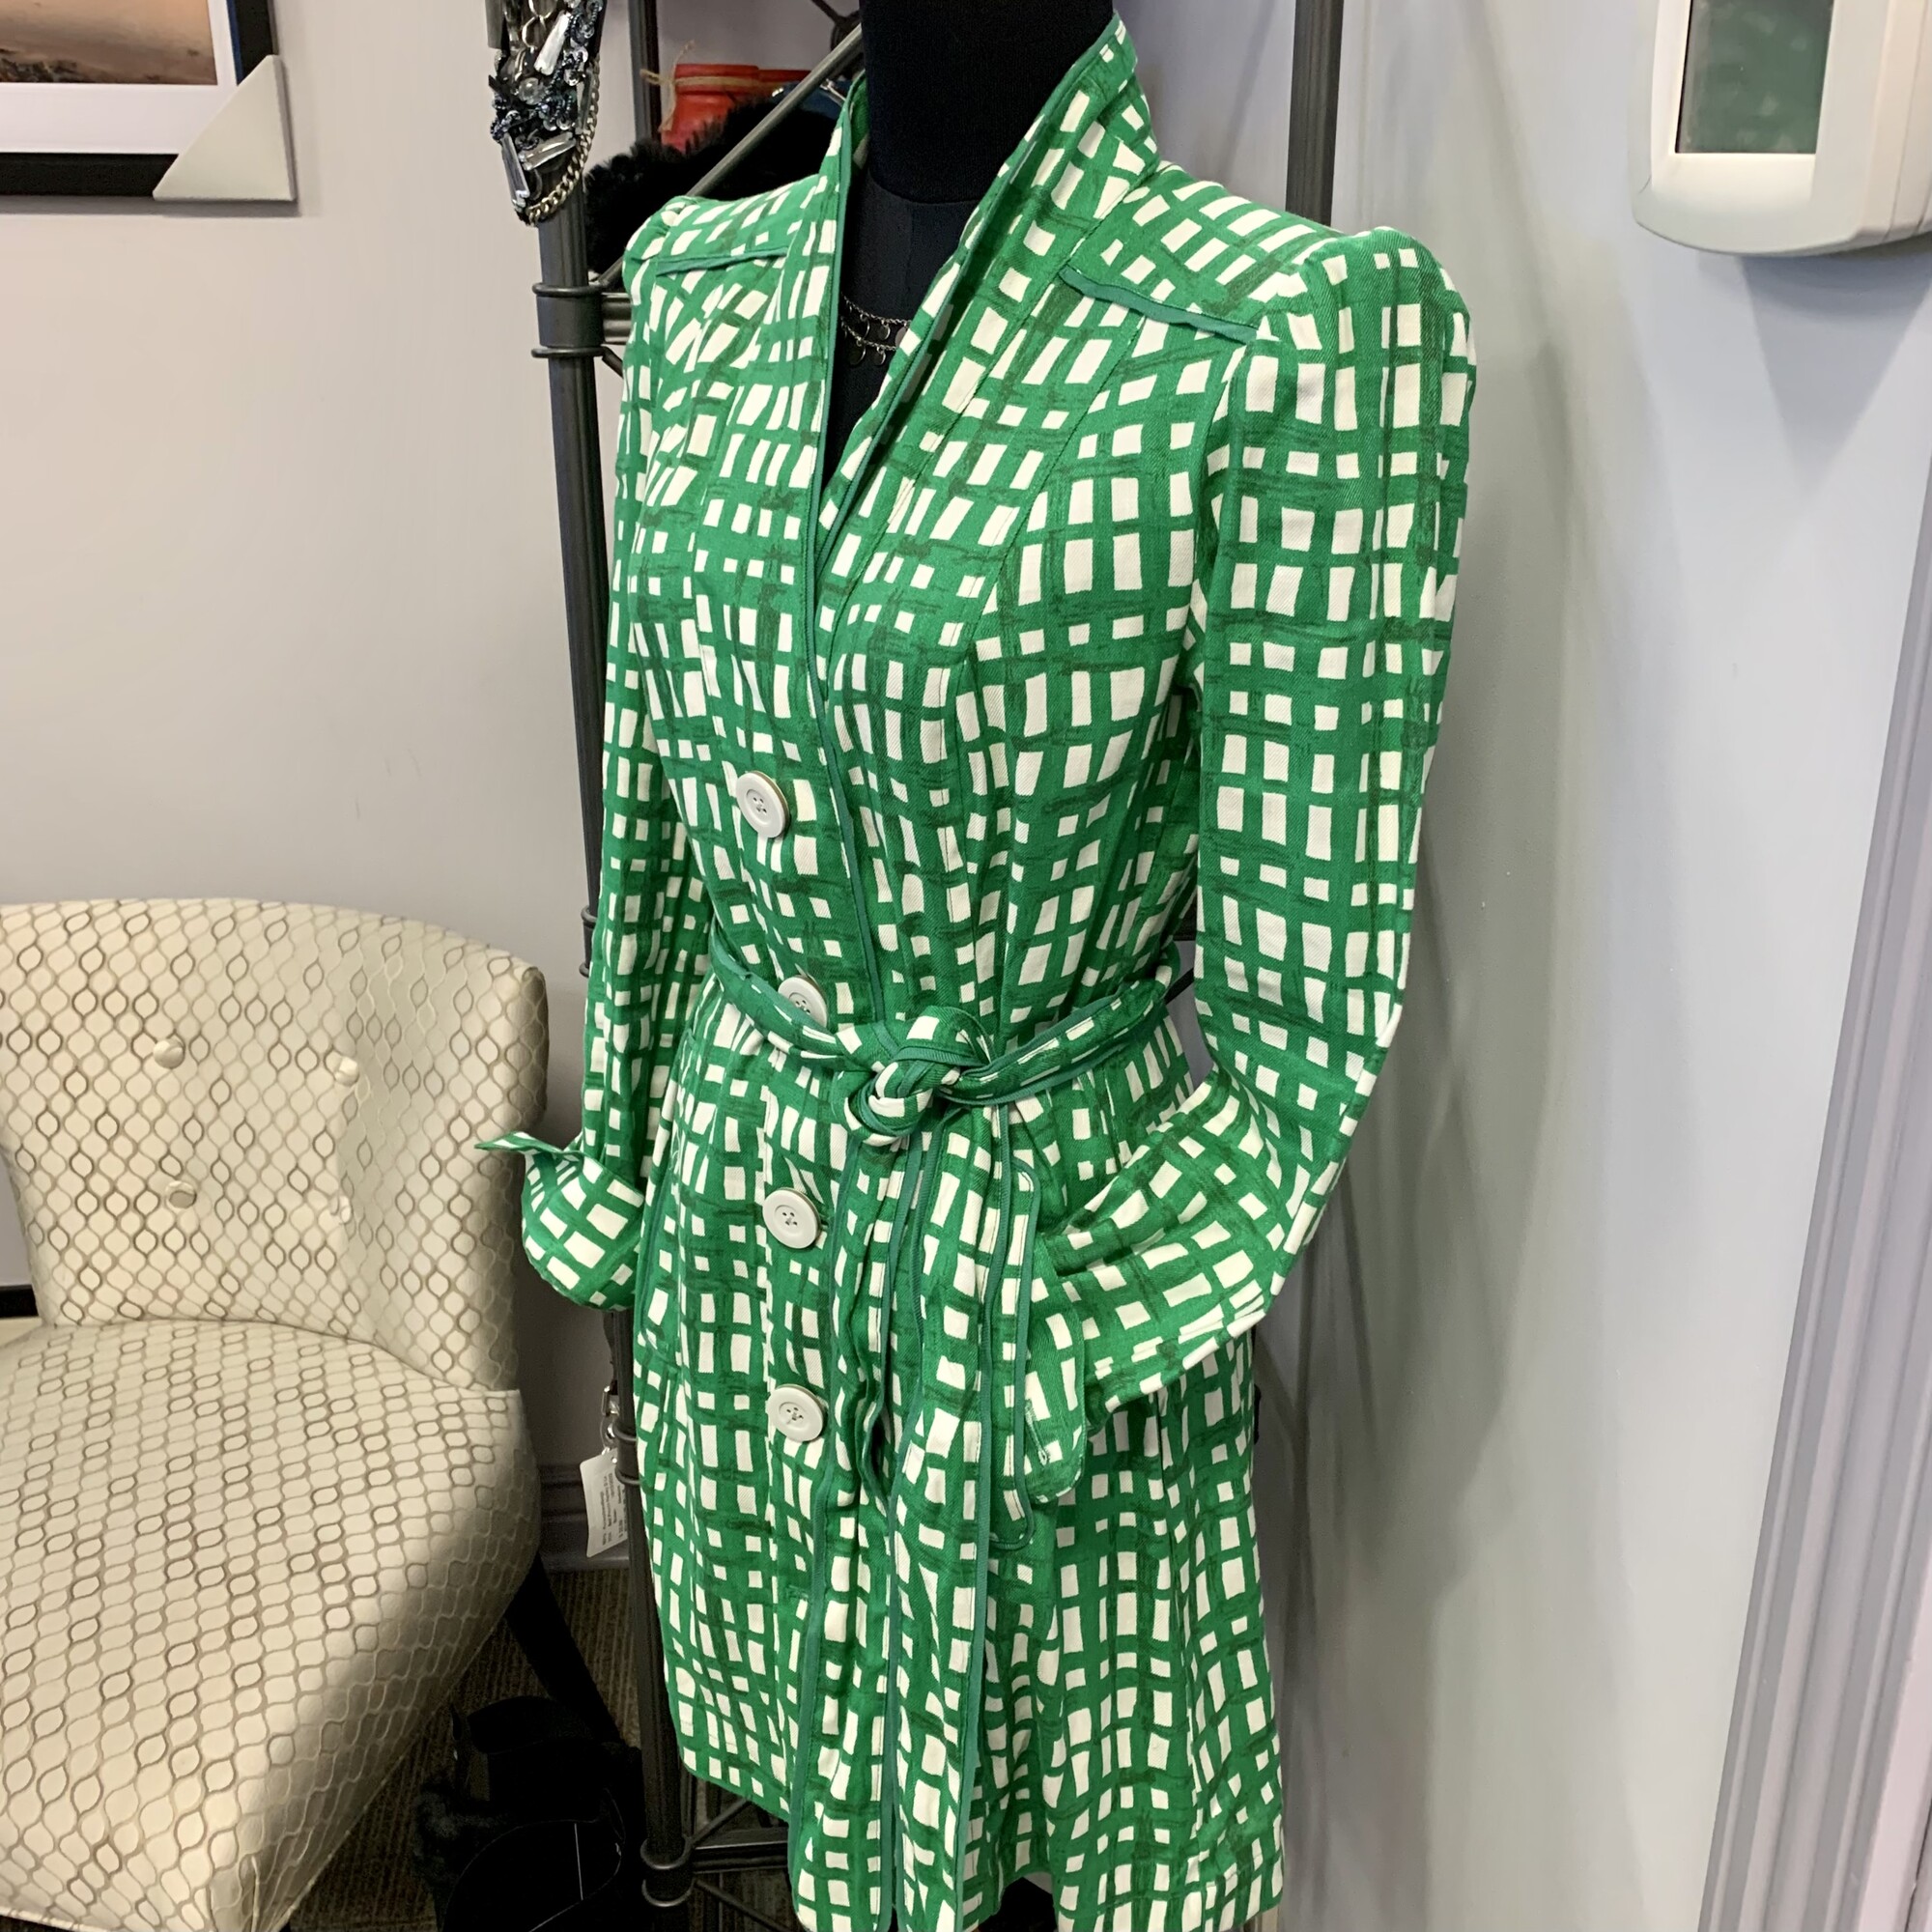 Cabi Trench Short Checkered,
Colour: Green and white,
 Size: XSmall - roomy would fit Small